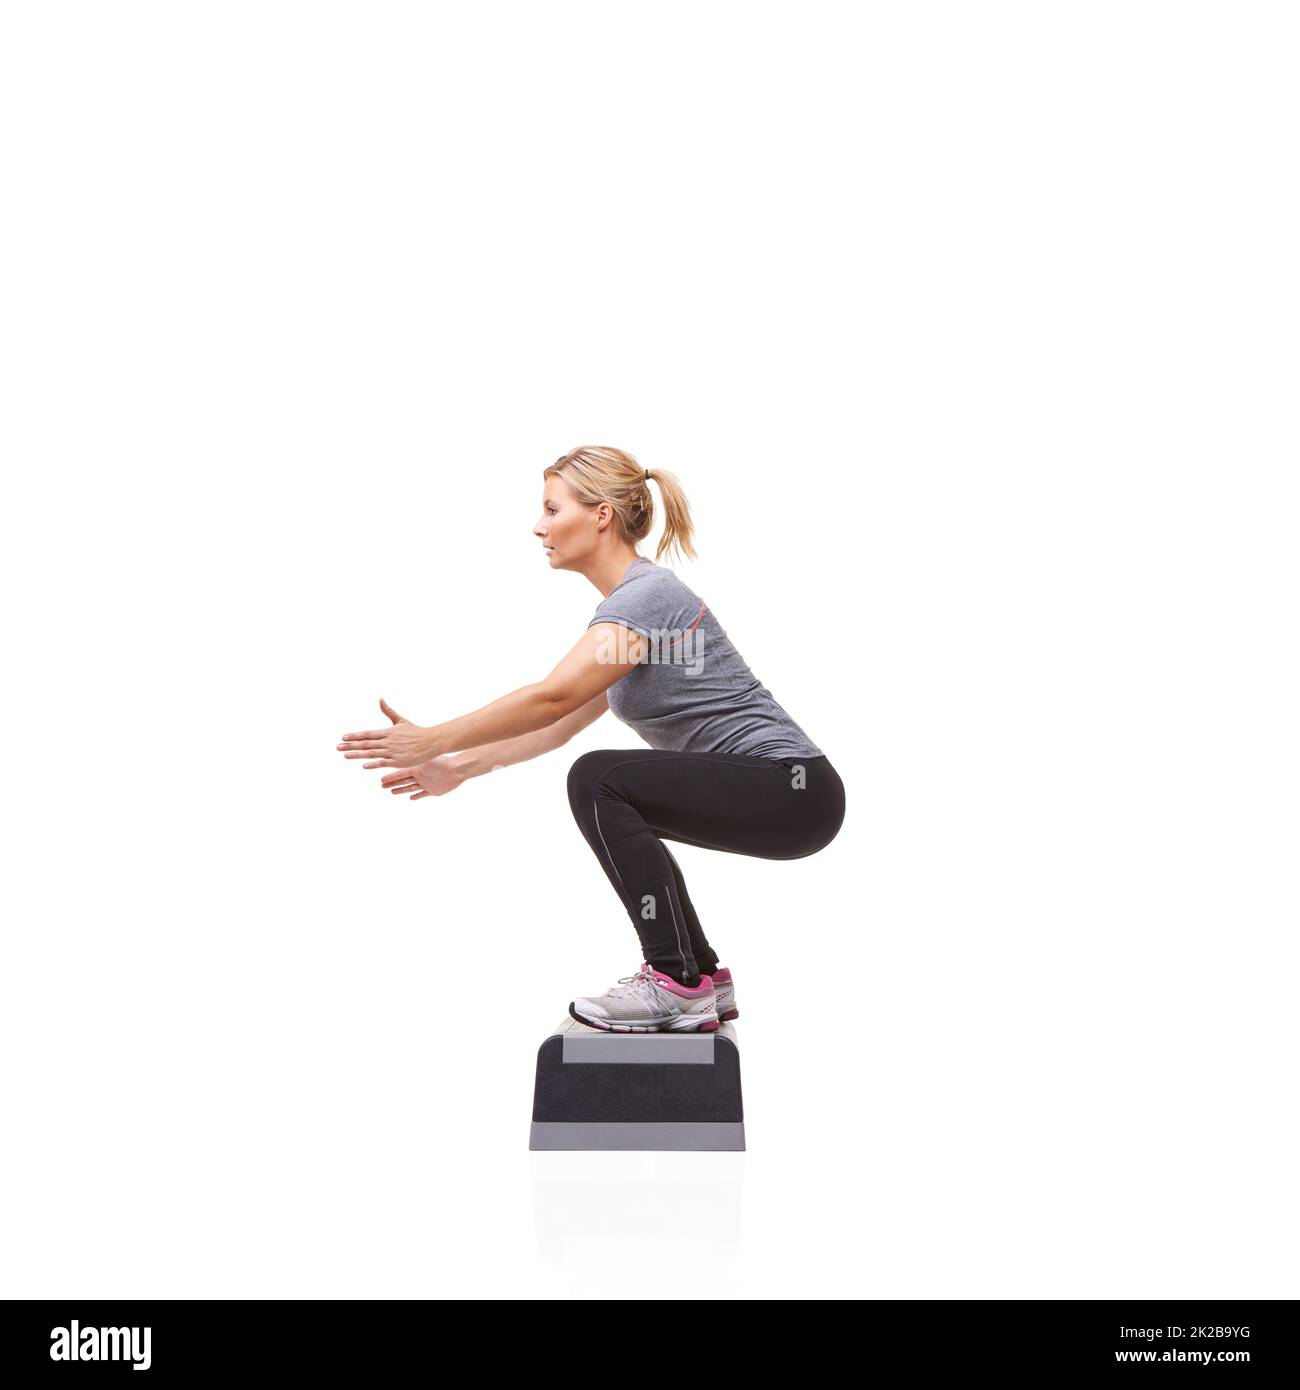 Doing squats to tone her body. A smiling young woman doing aerobics on an aerobic step against a white background. Stock Photo